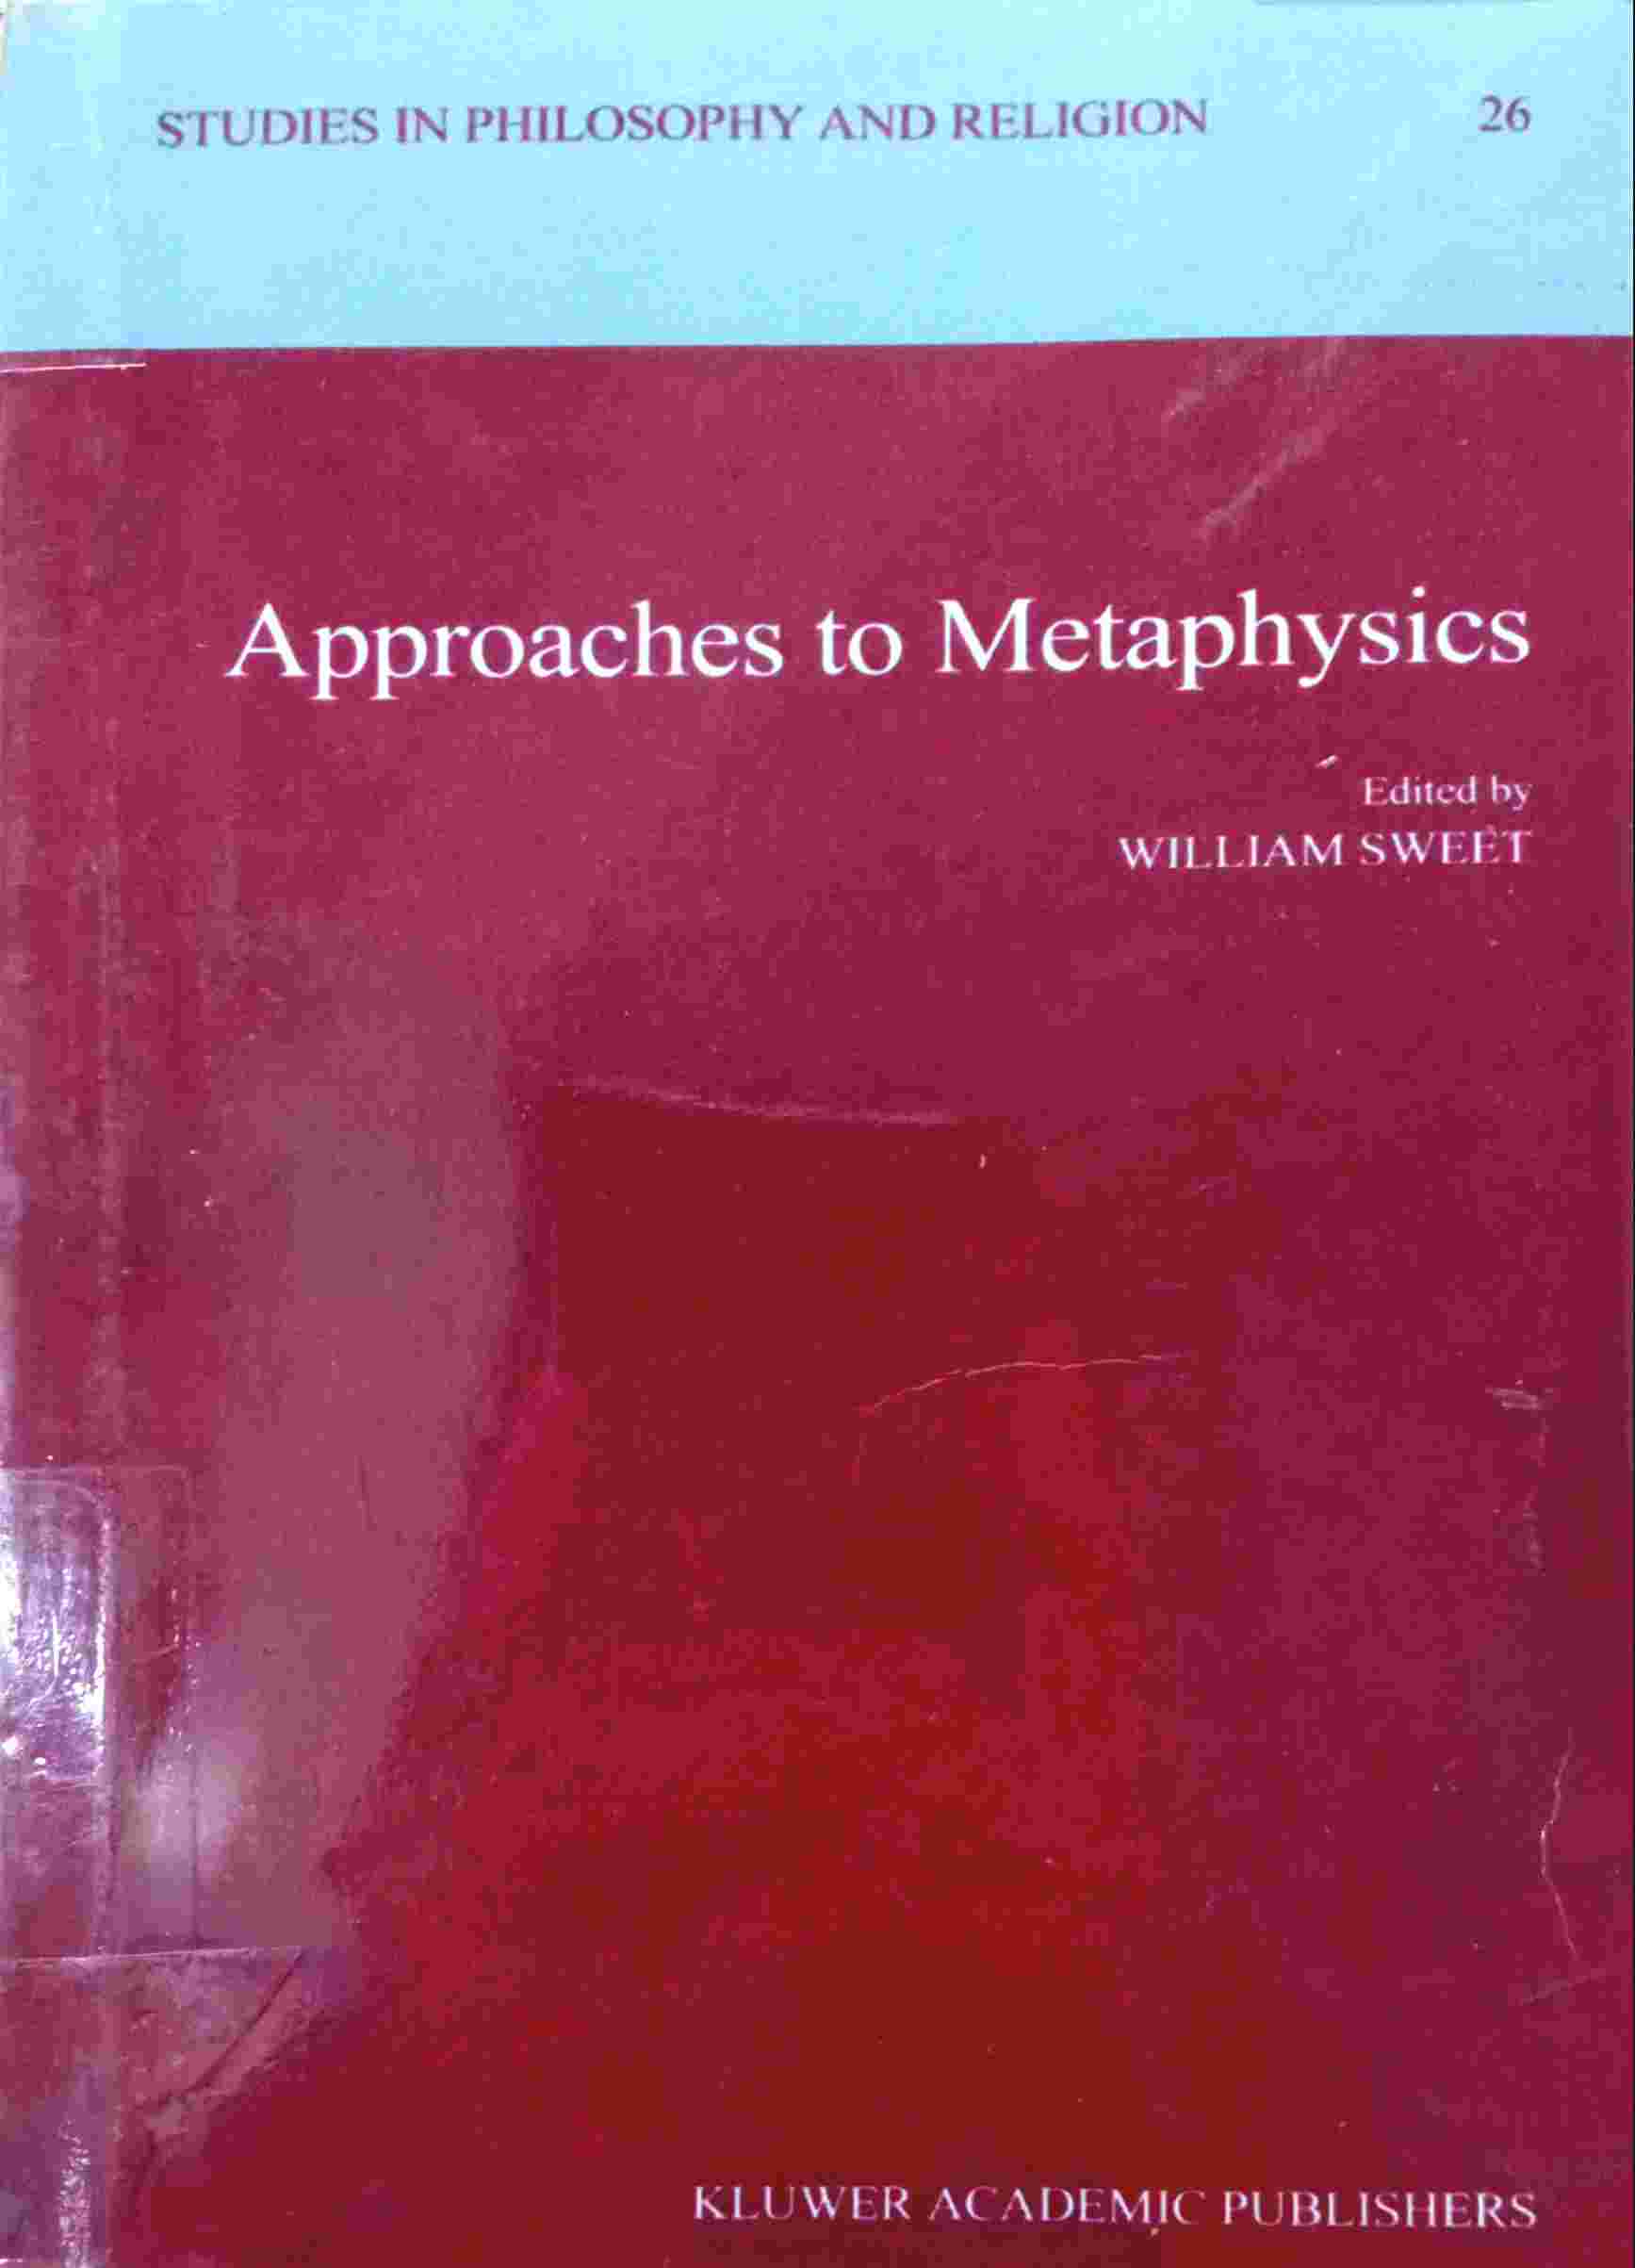 APPROACHES TO METAPHYSICS